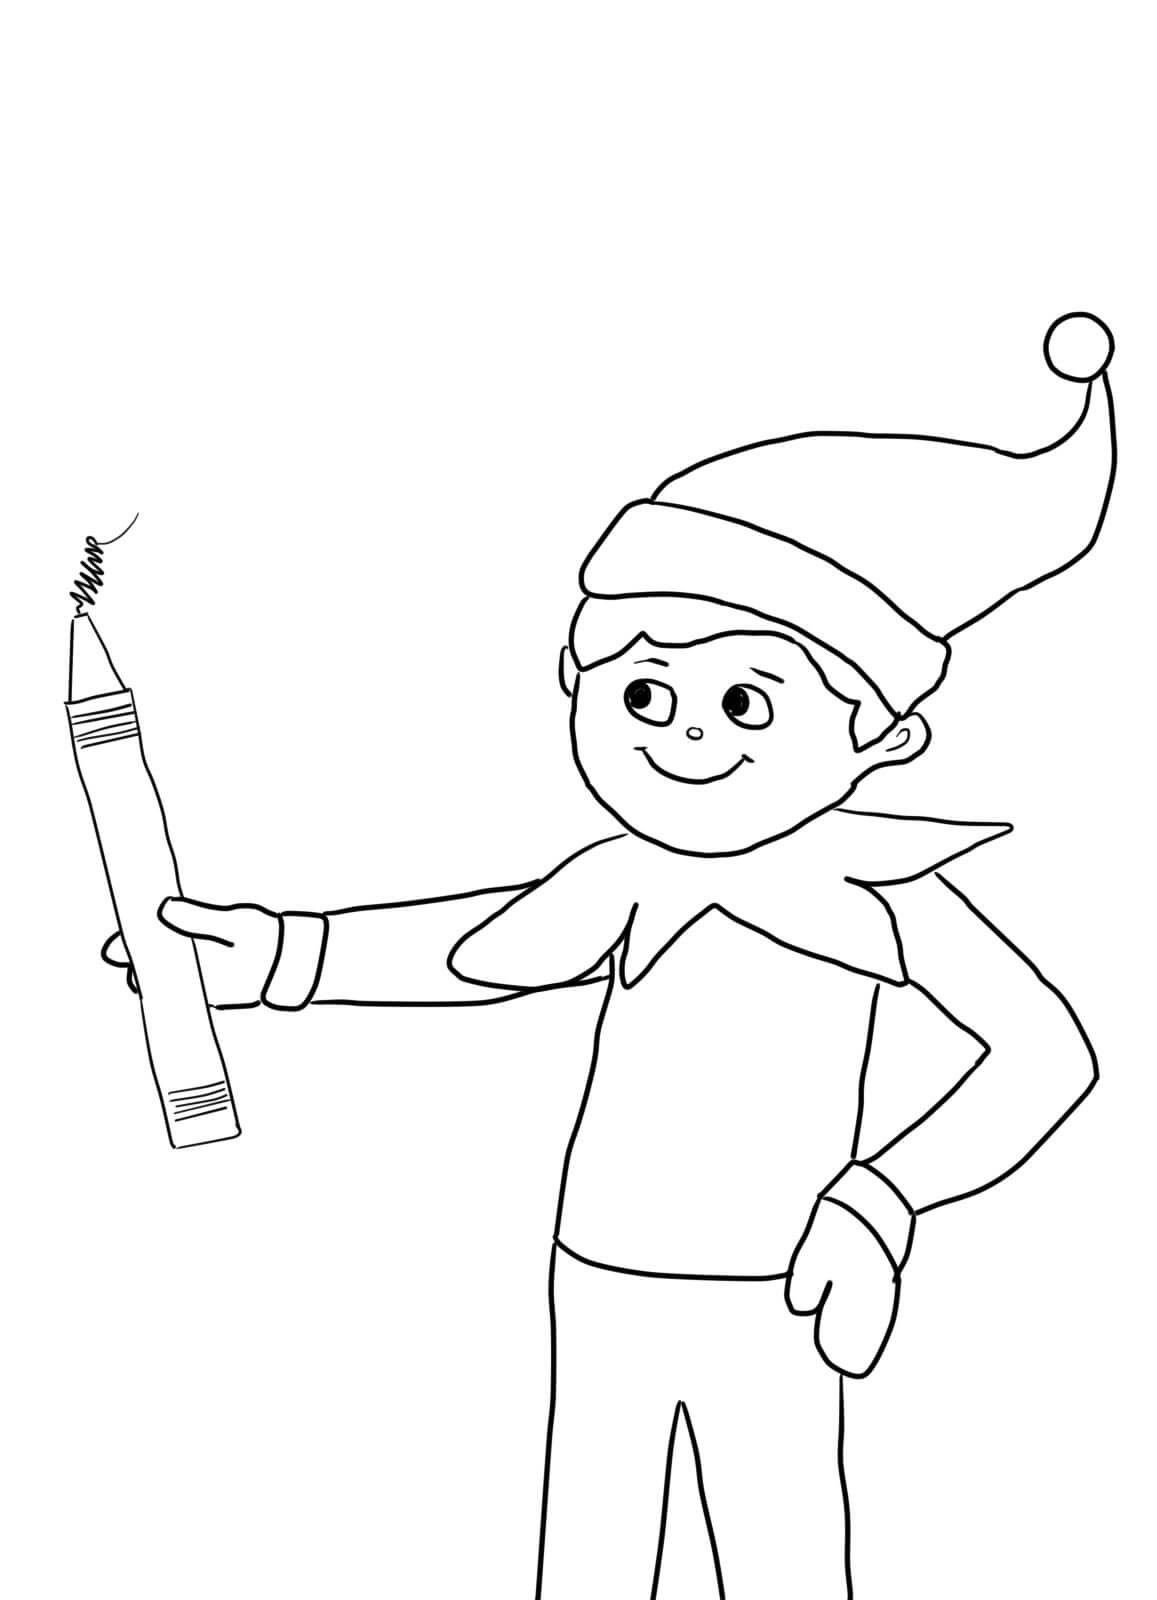 coloring-pages-elf-on-the-shelf-4.jpg